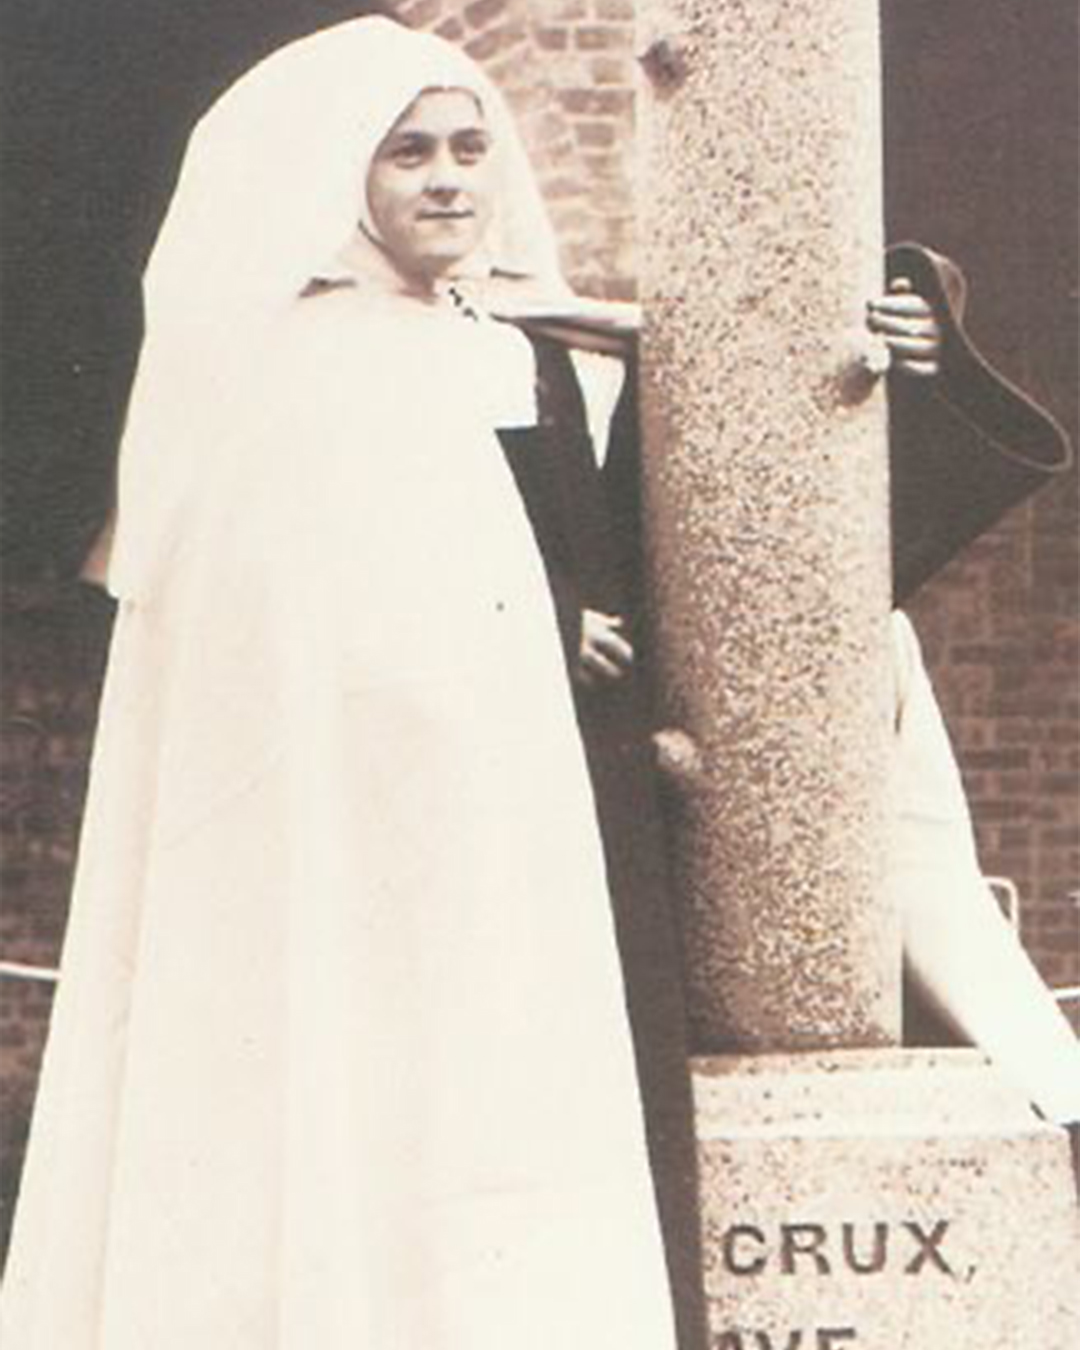 St. Therese in Carmelite Habit by a stone column.